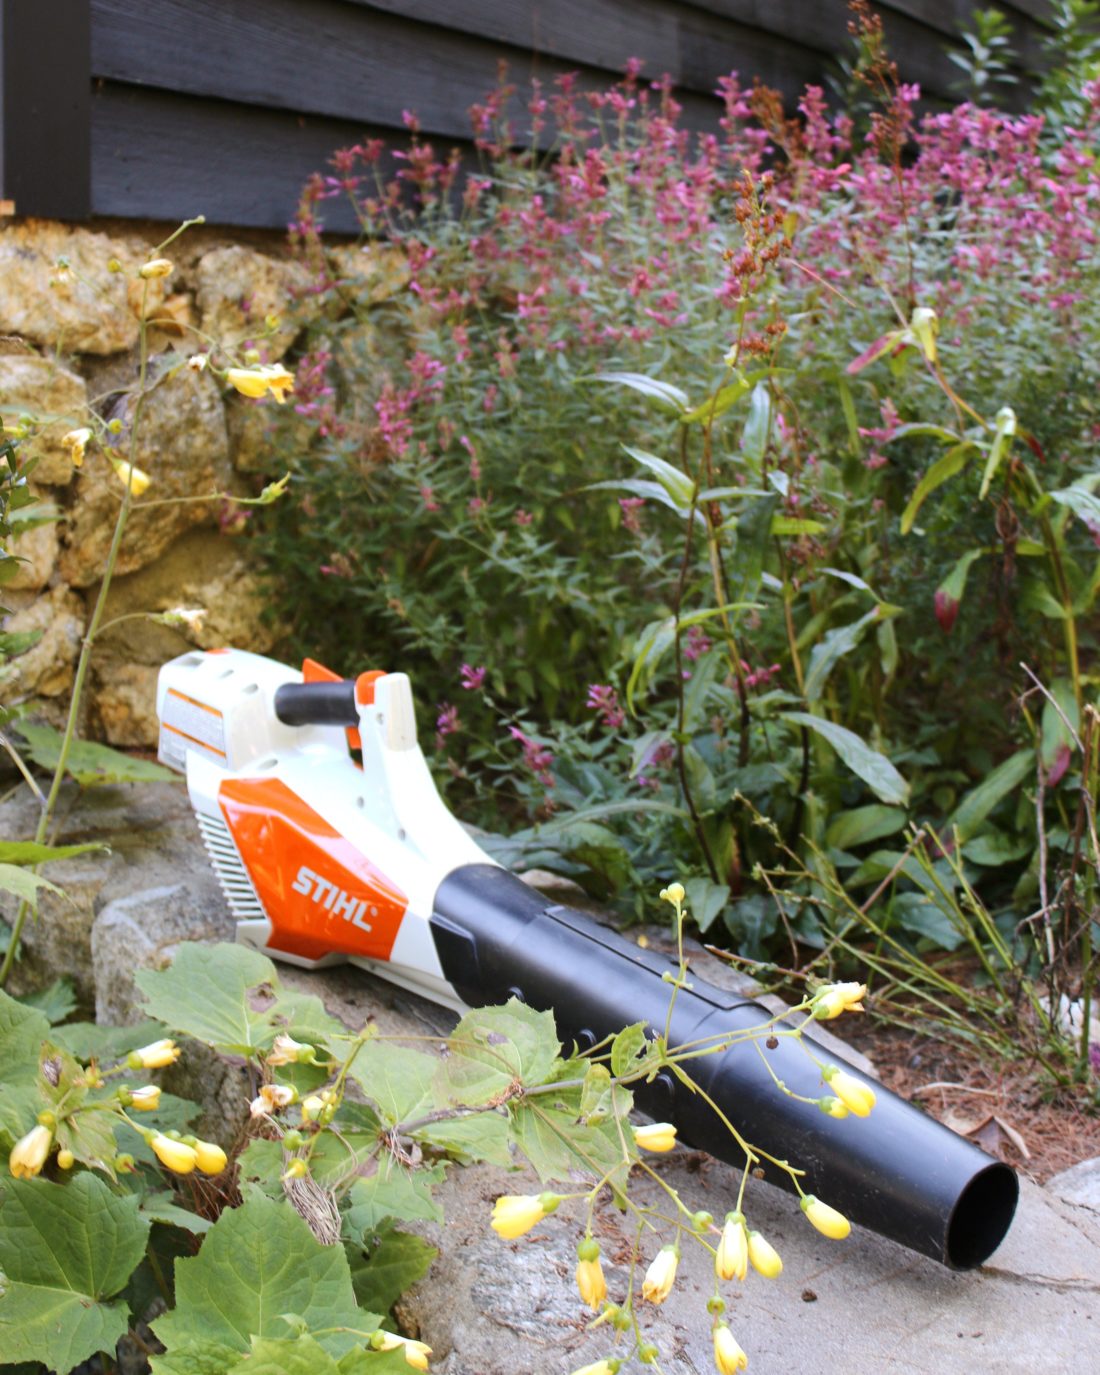 The future of garden tool power is battery